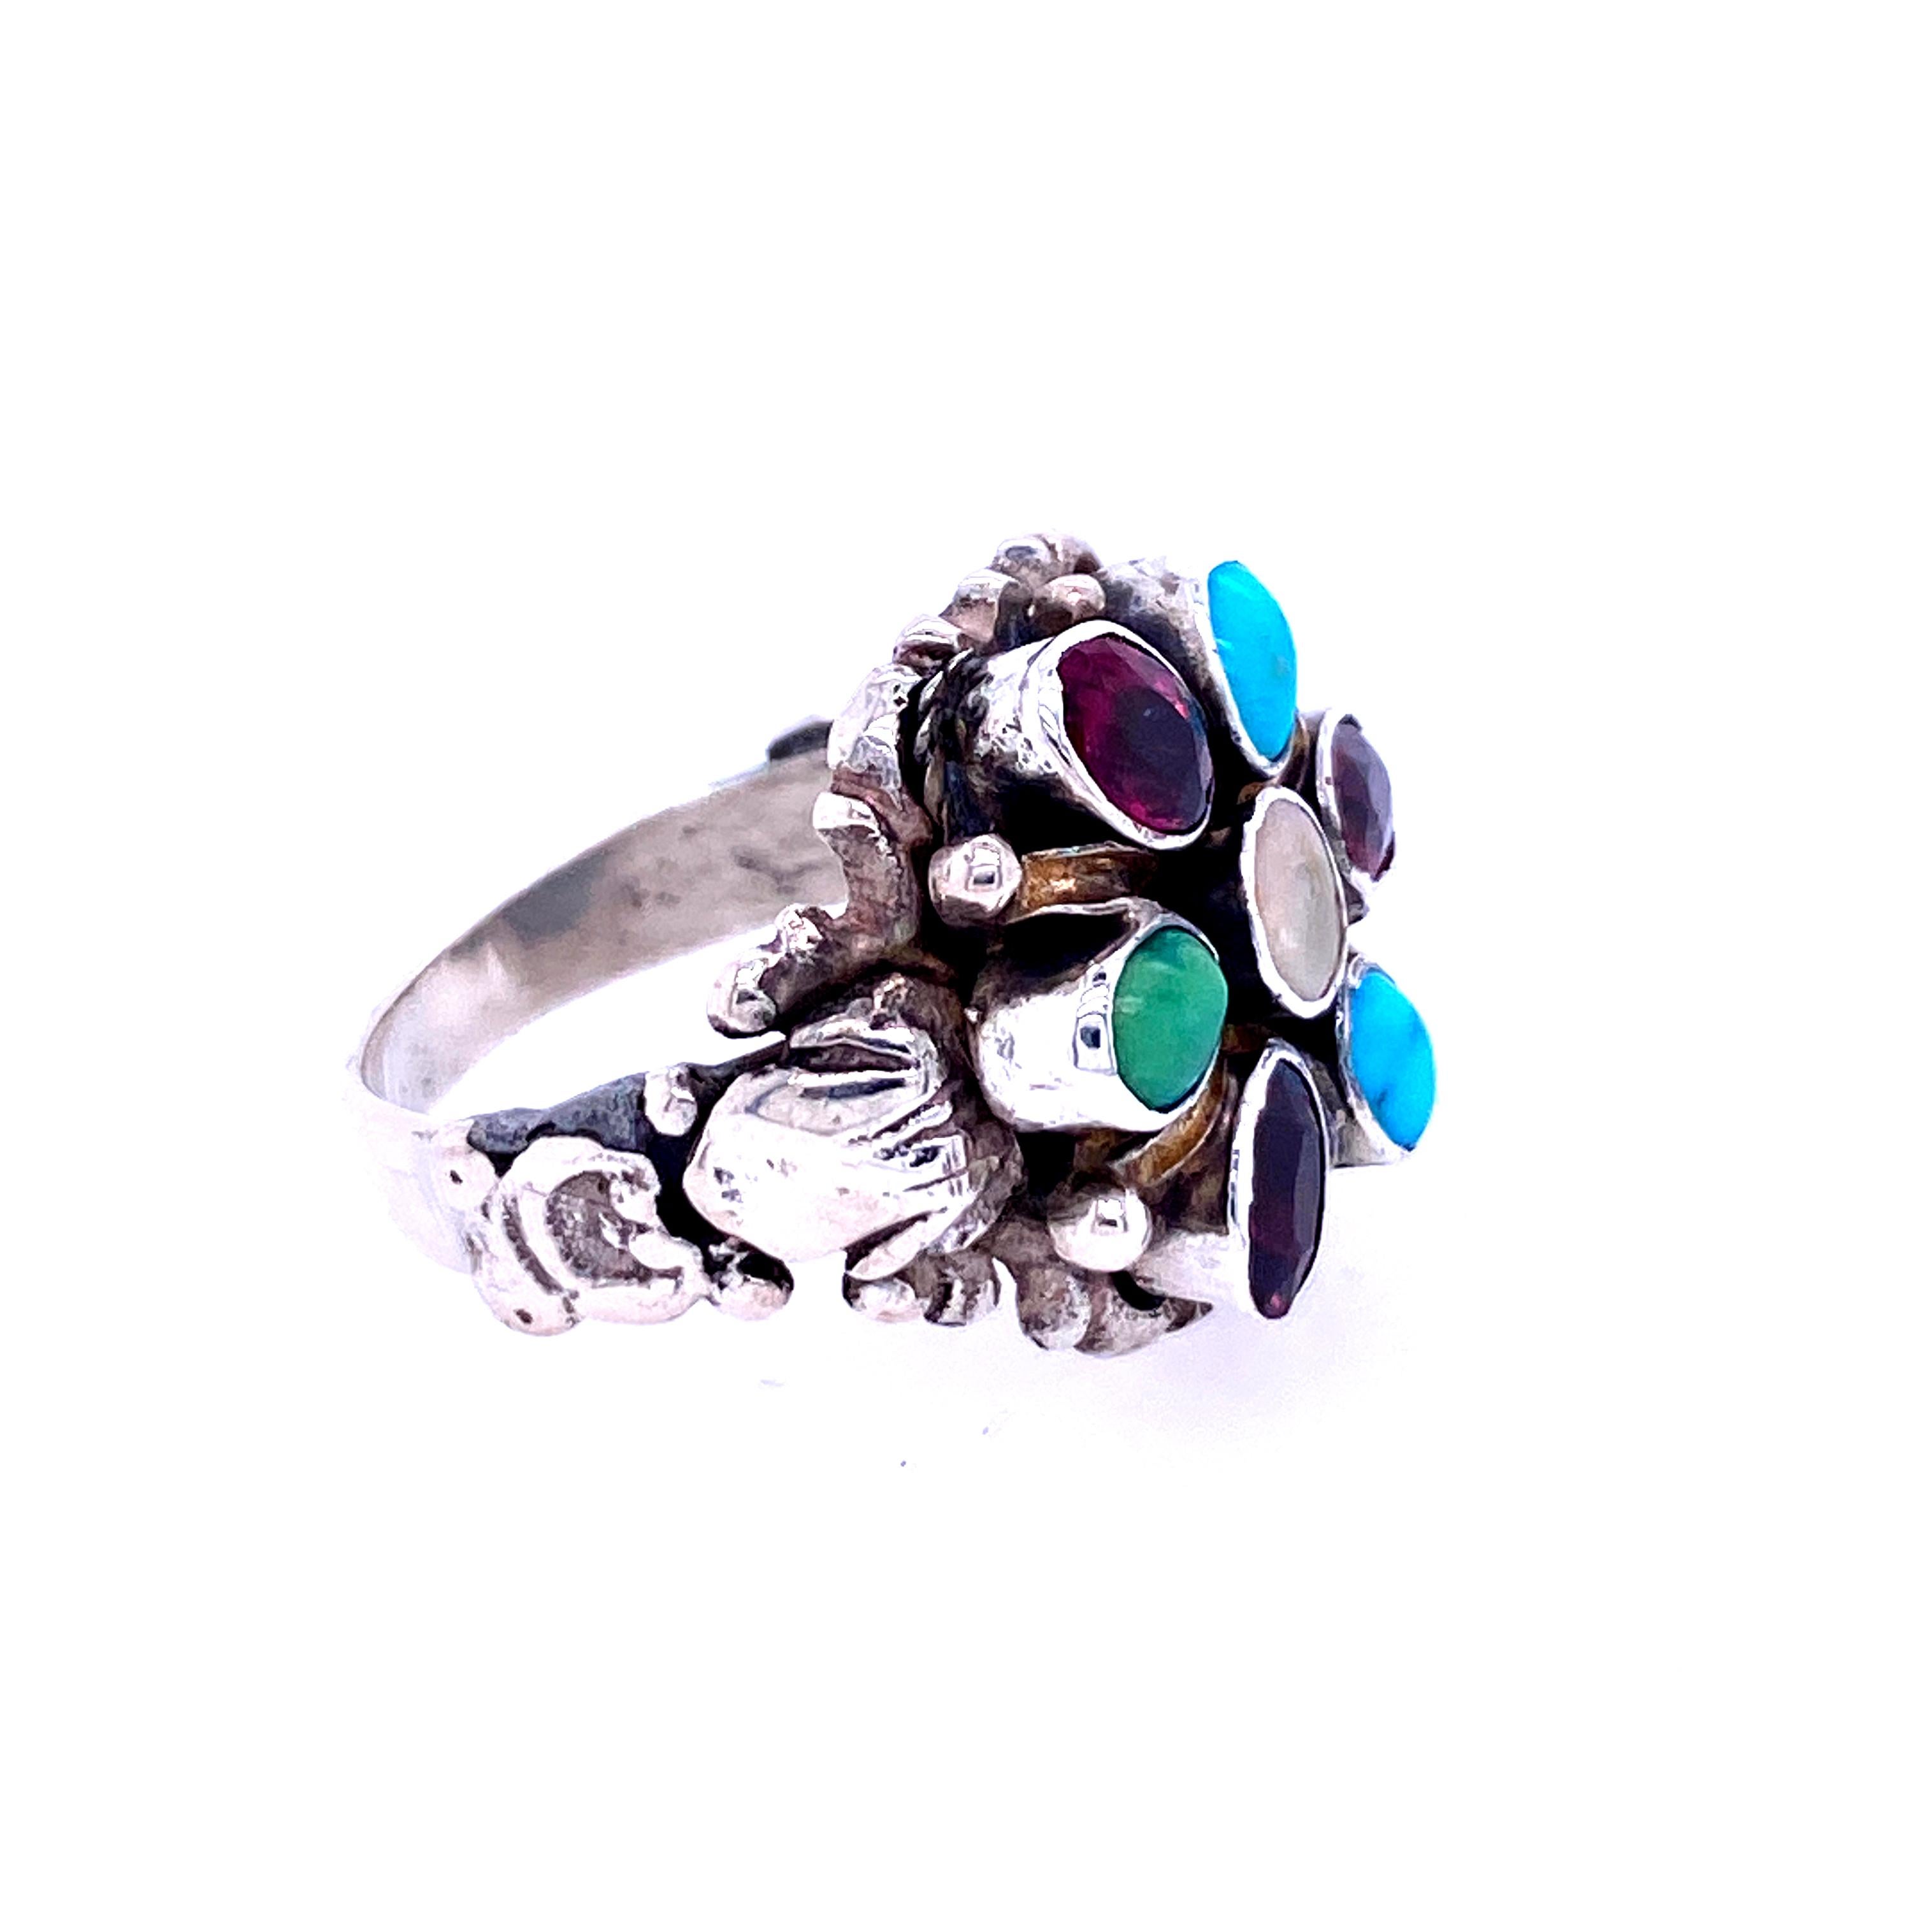 One sterling silver cluster ring set with one center 5mm round mother of pearl, surrounded by three oval garnets measuring 5x3mm  and three oval turquoise stones measuring 5x3mm .  The shank measures 6mm near the top of the ring and tapers to 3mm at